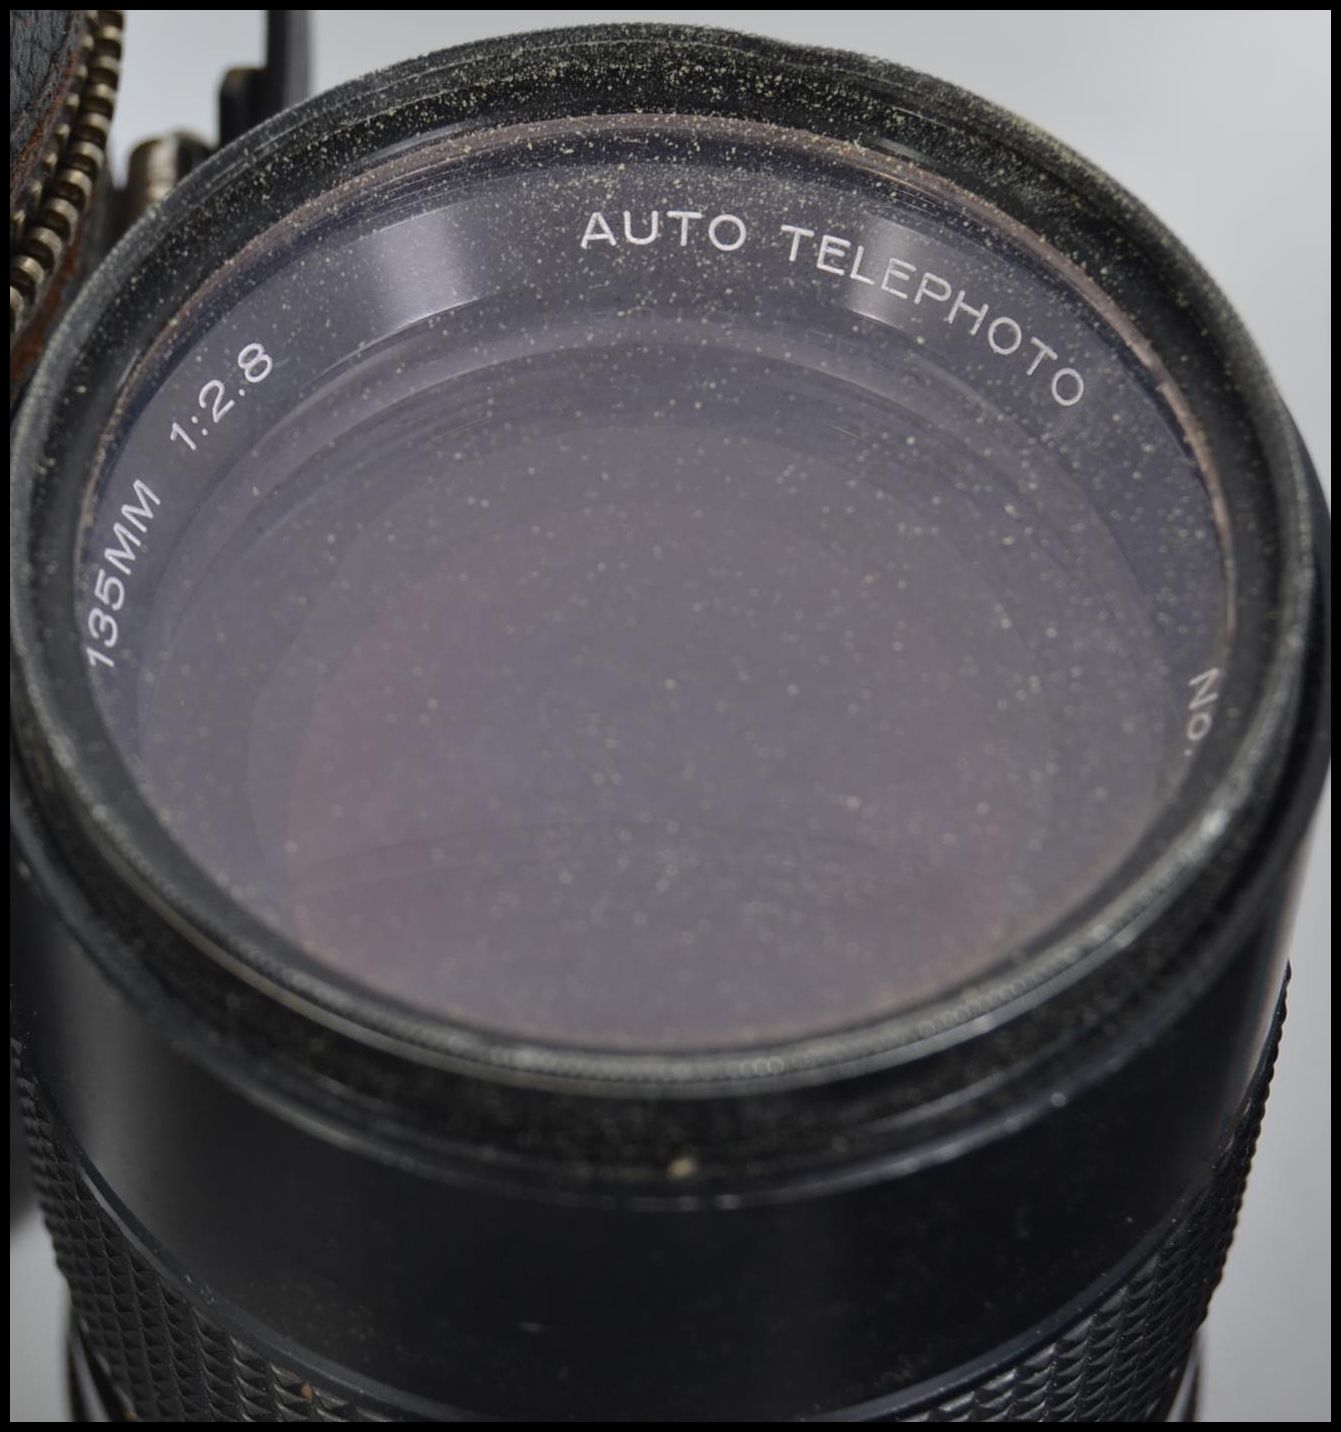 CAMERAS: A collection of cameras and lenses to include Super Albinar 846067 lens, - Image 3 of 4